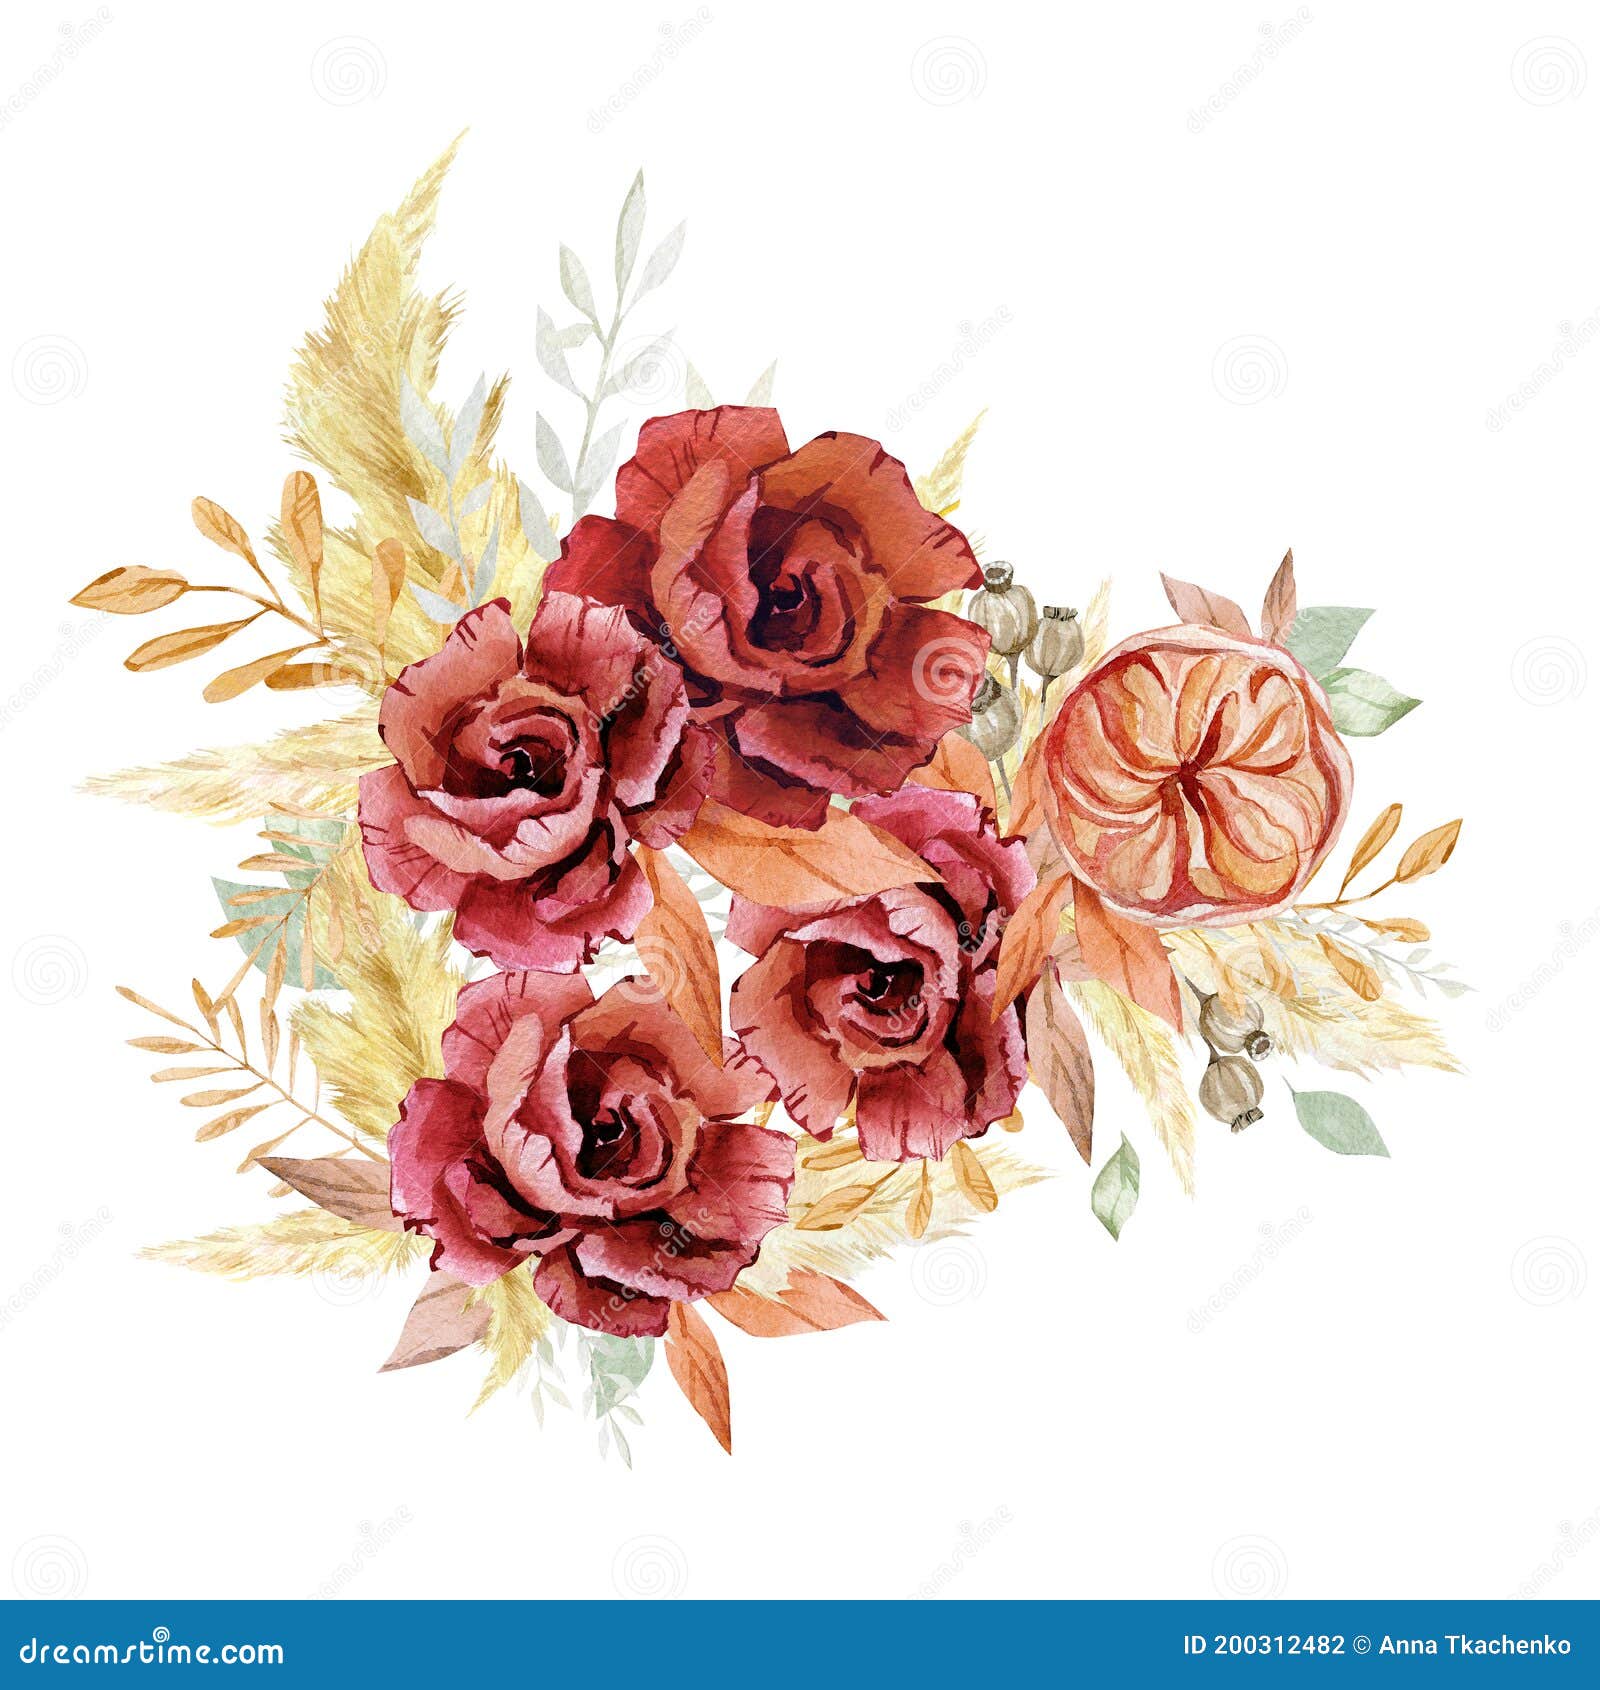 https://thumbs.dreamstime.com/z/watercolor-burgundy-floral-bouquet-fall-autumn-flower-boho-wedding-style-pampas-grass-dried-wildfloral-invintation-baby-200312482.jpg